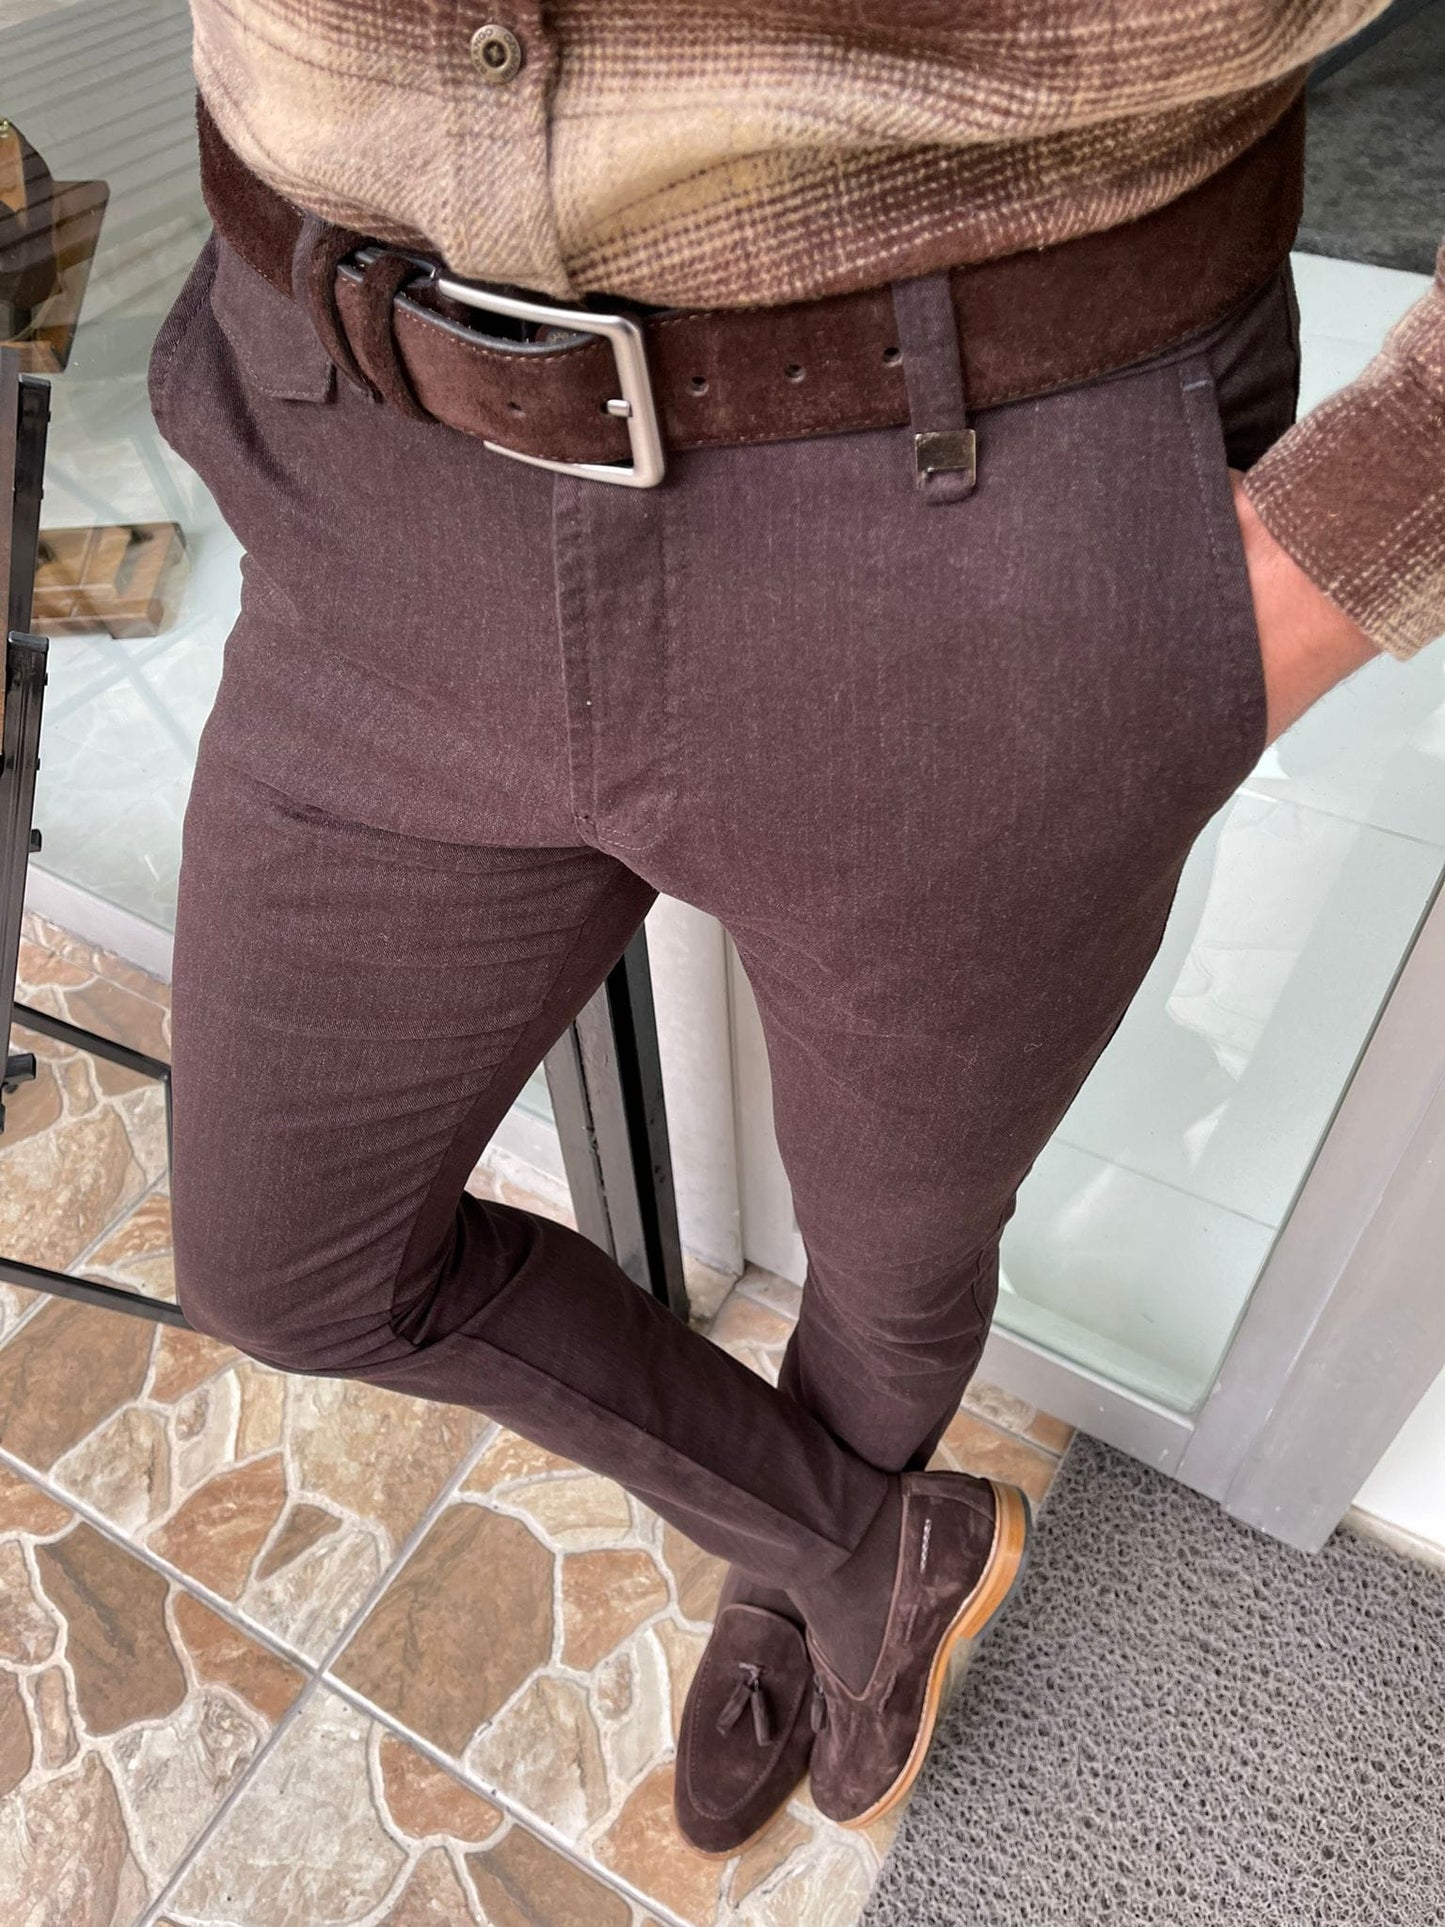 Slim Fit Side Pocket Navy Brown Pants - OUTFITLIFT